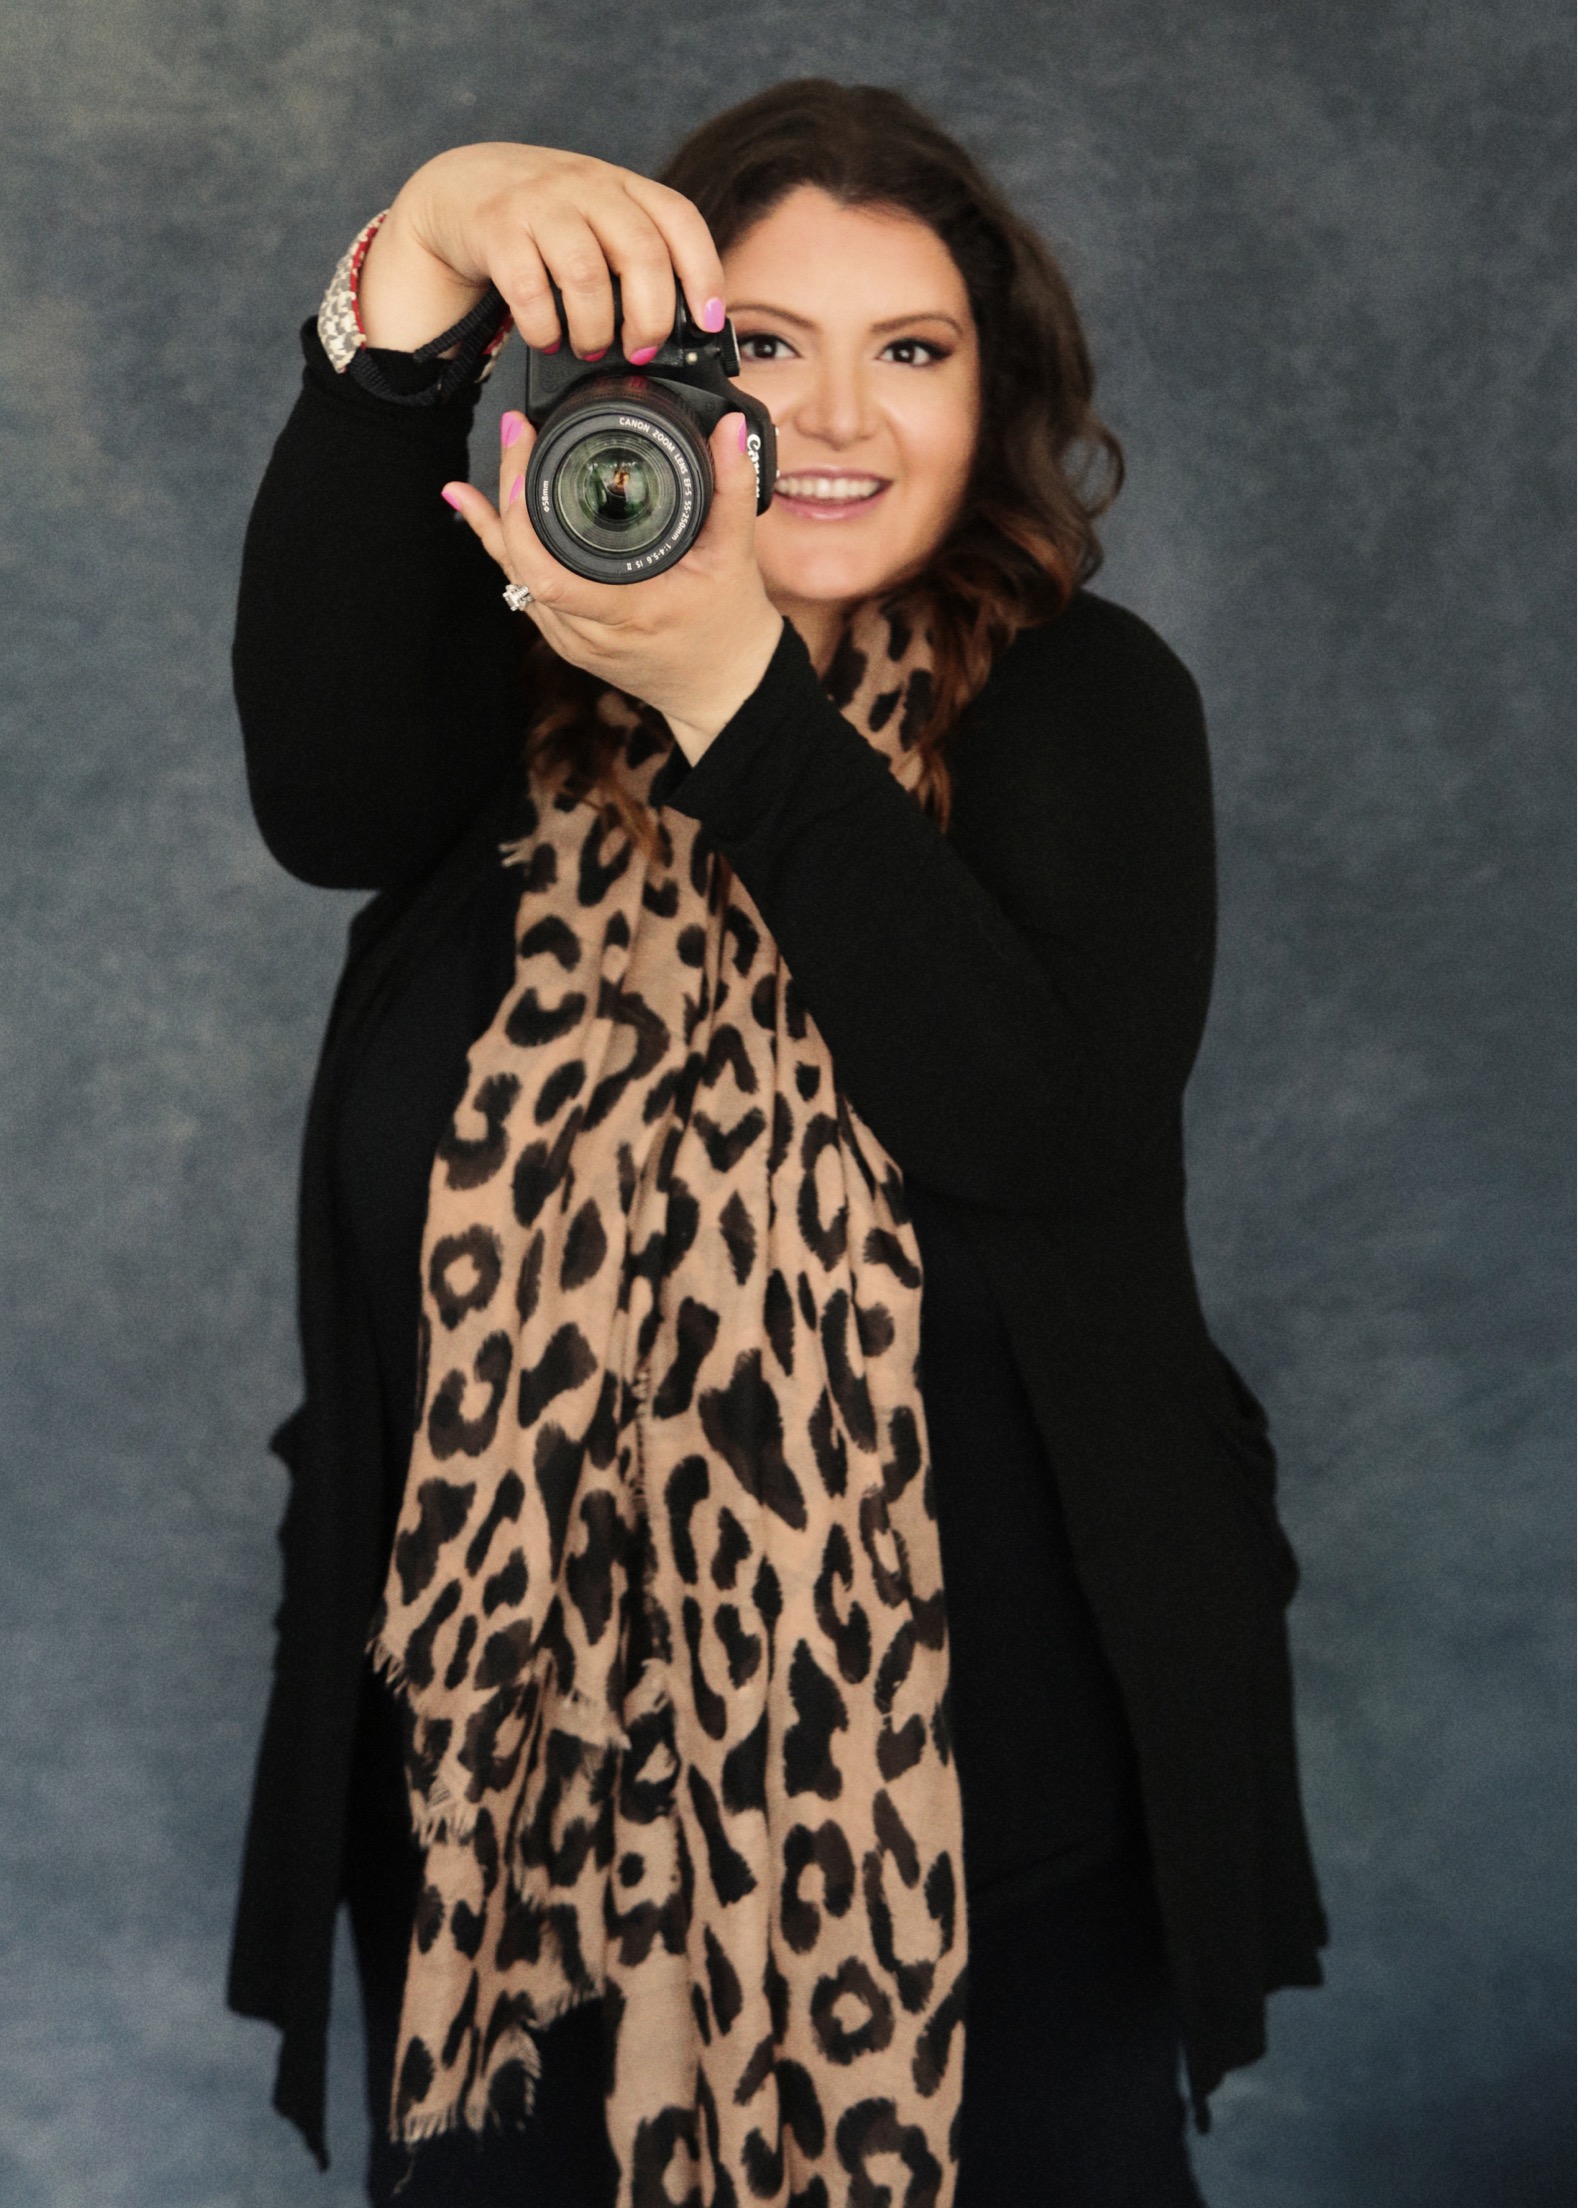 photo of Dorly Roy, photographer holding a canon camera with her pink fingernails, wearing leopard scarf. dark blue photo backdrop. she is smiling.